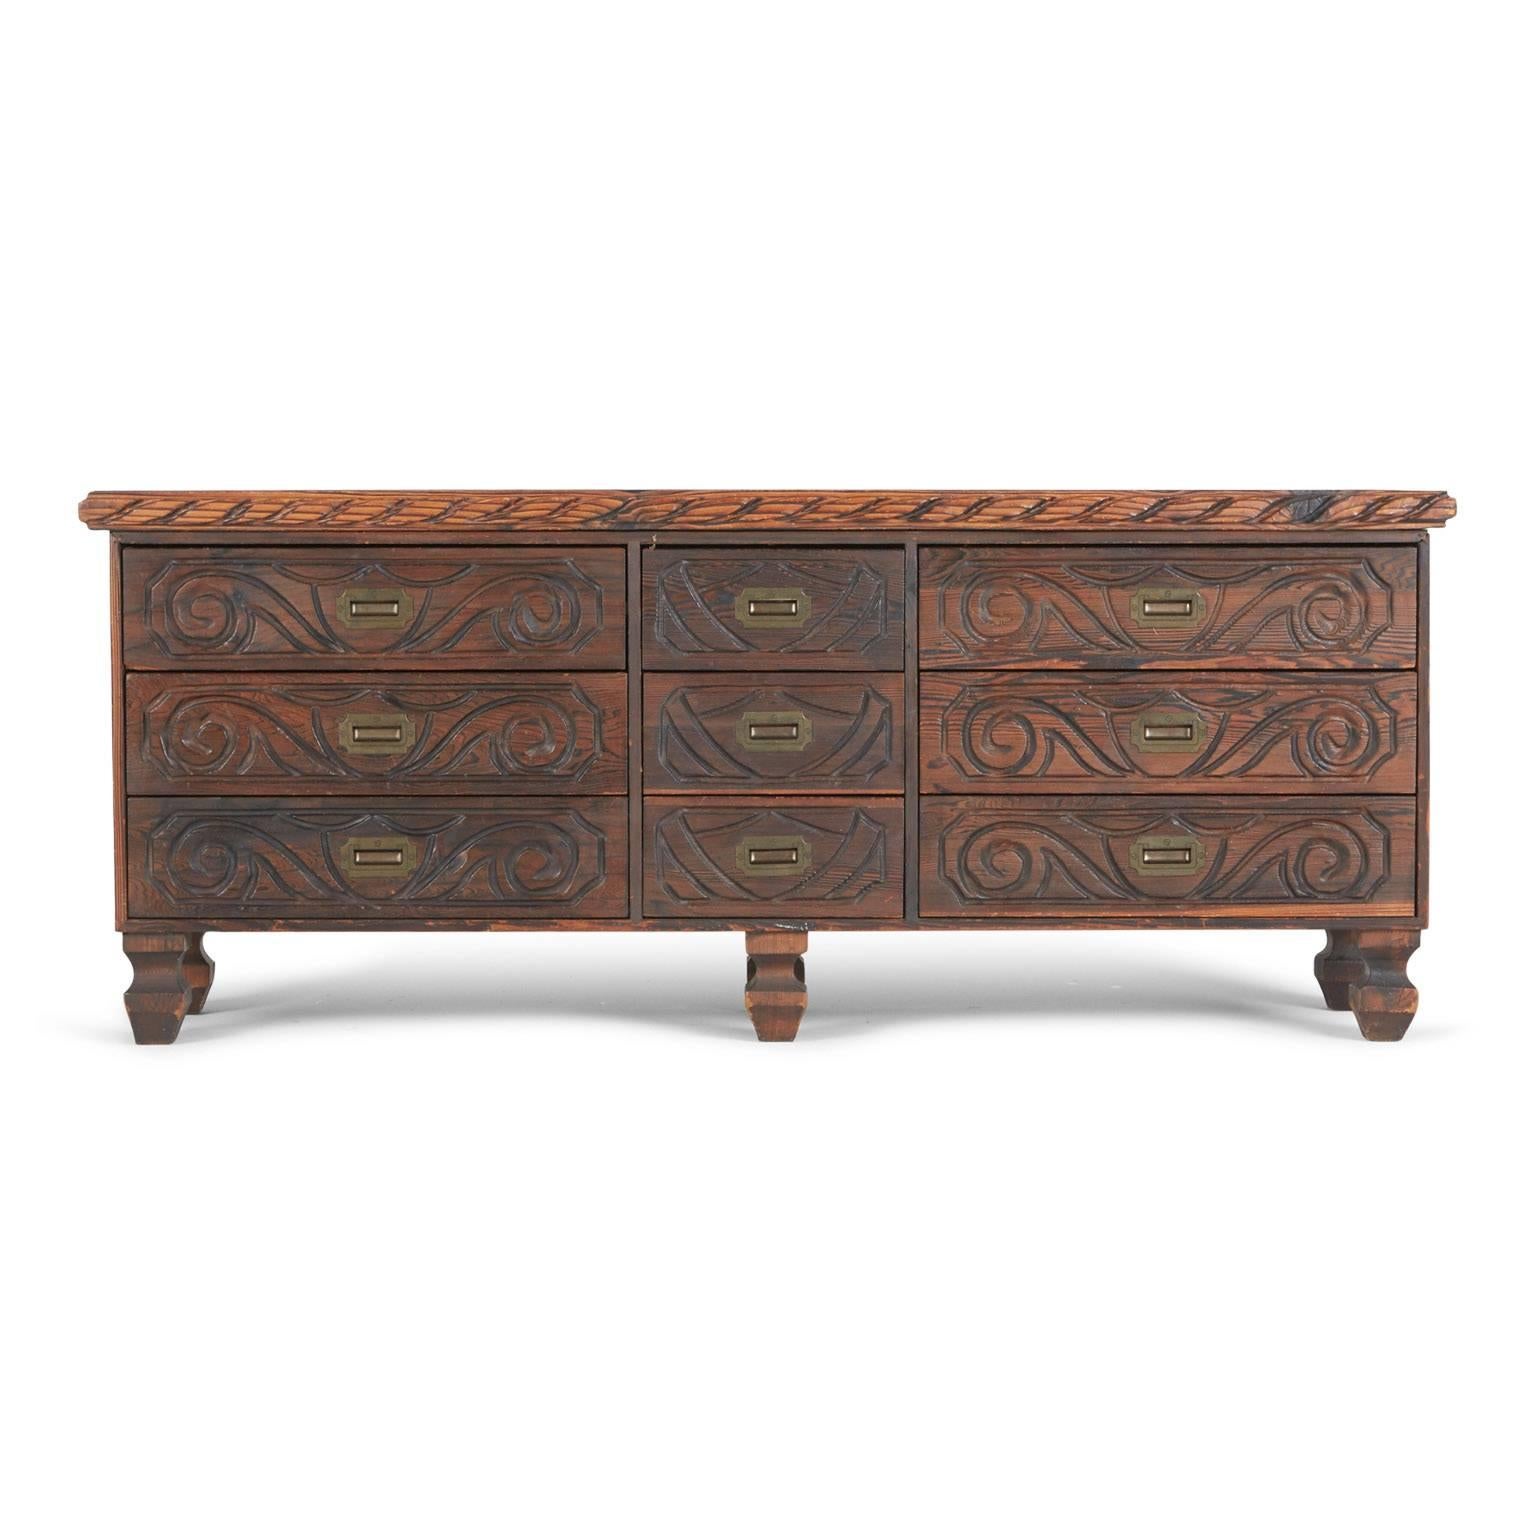 This ornately crafted red walnut dresser with carved exotic details is a testament to William Westenhaver's Modern Primitive creations. Influenced by Polynesian natives sculpting their ancestral deities in to wood furnishings, Westenhaver fused his